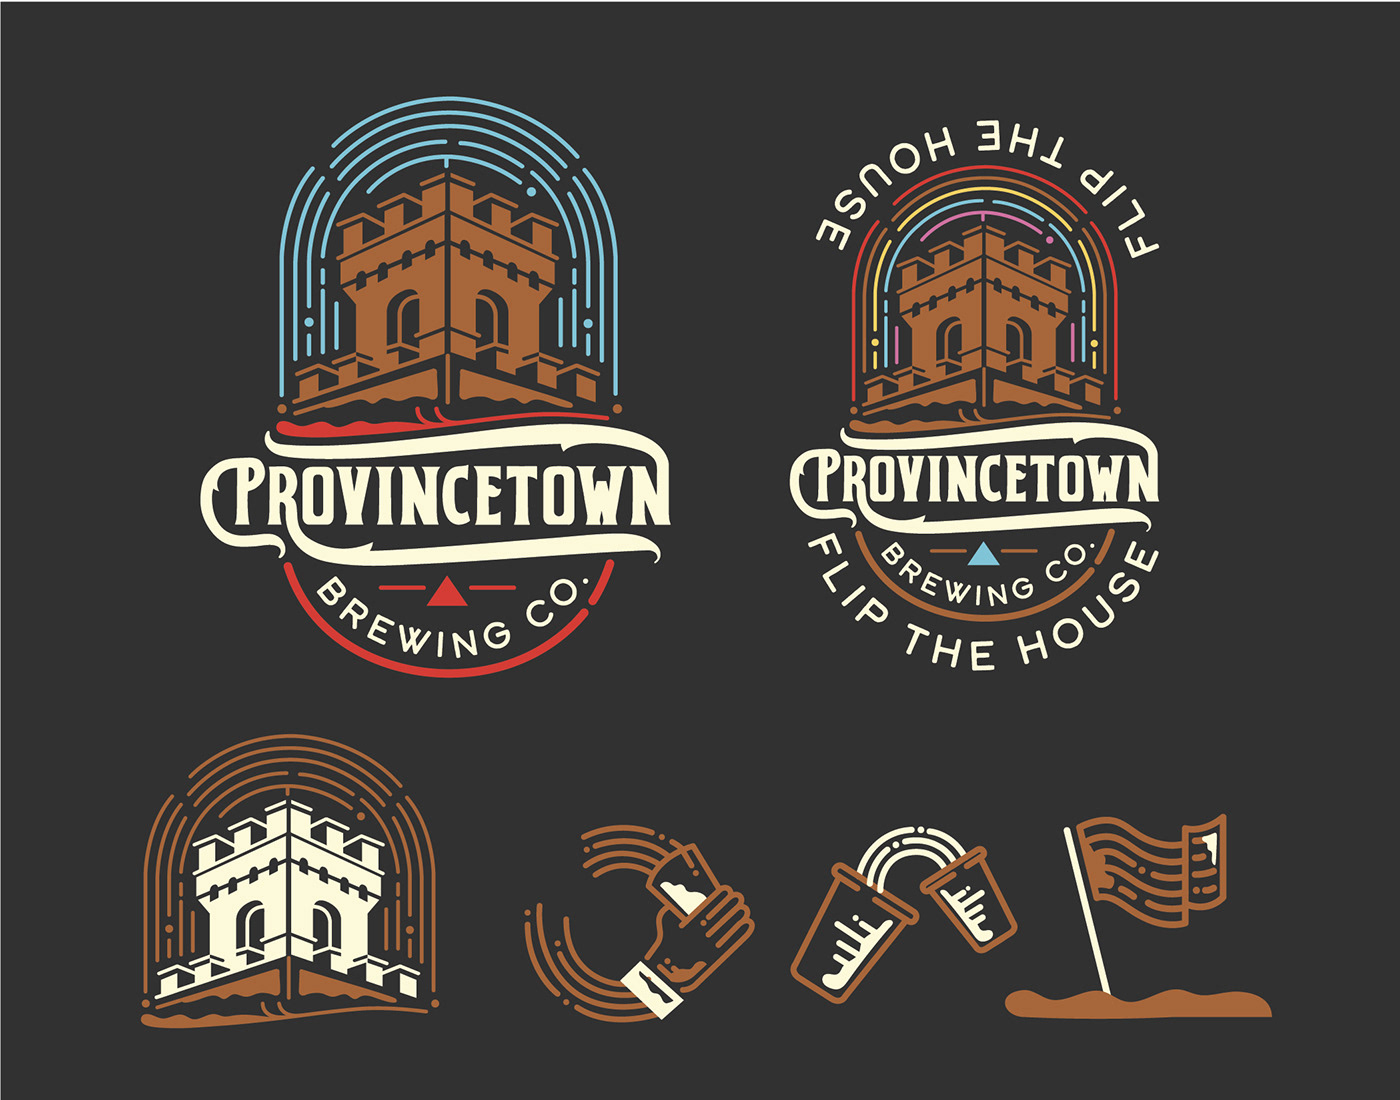 Provincetown beer brewery hands icons history flag drinks